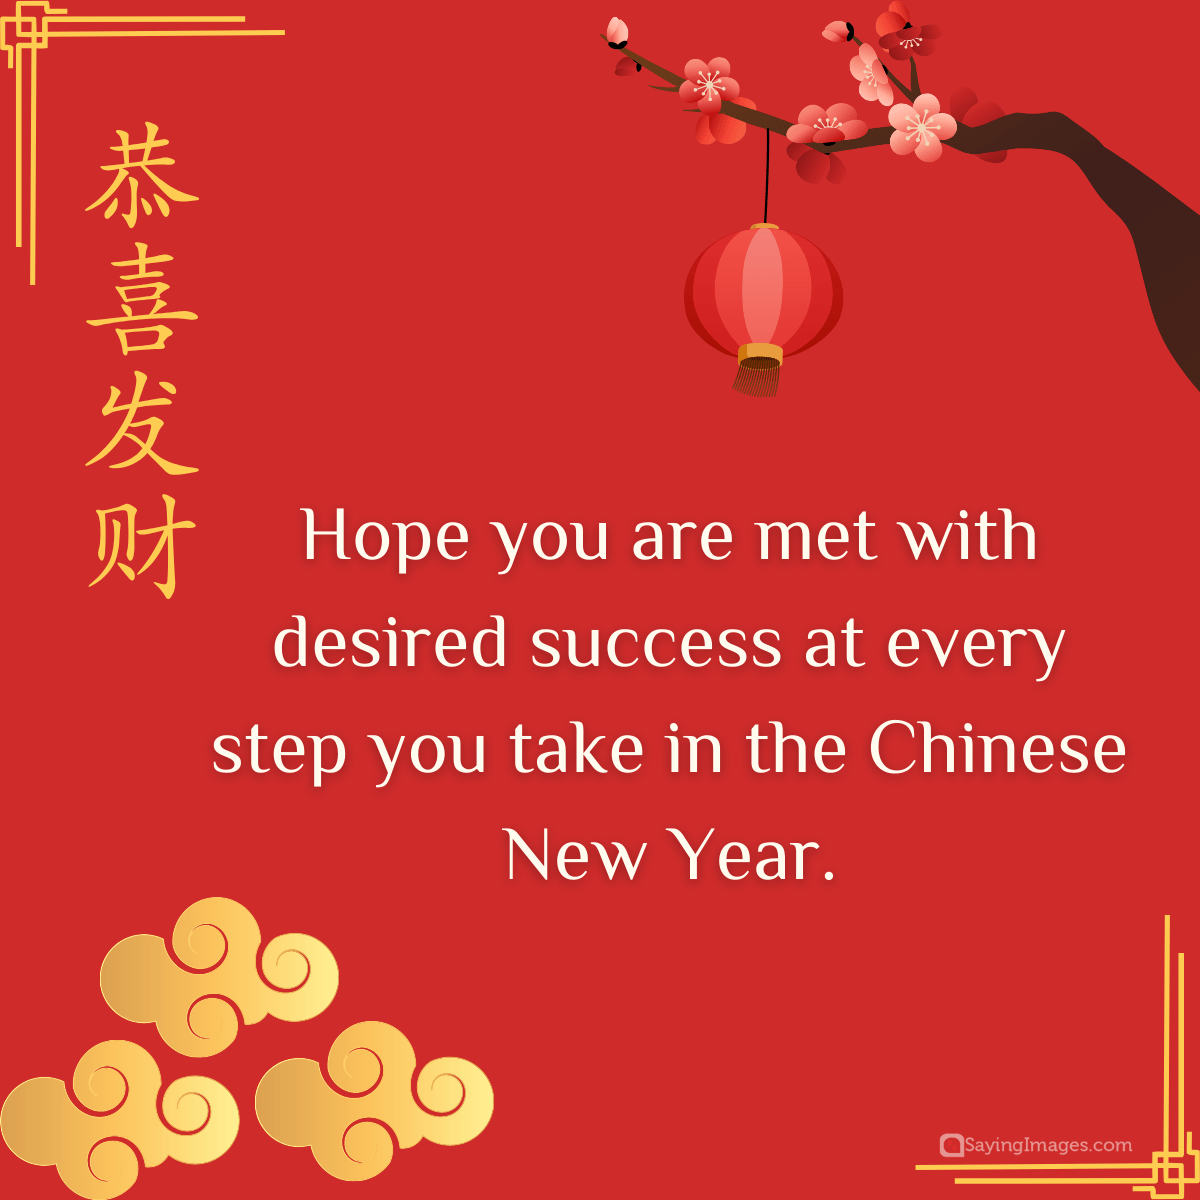 Hope you are met with desired success at every step you take in the Chinese New Year.